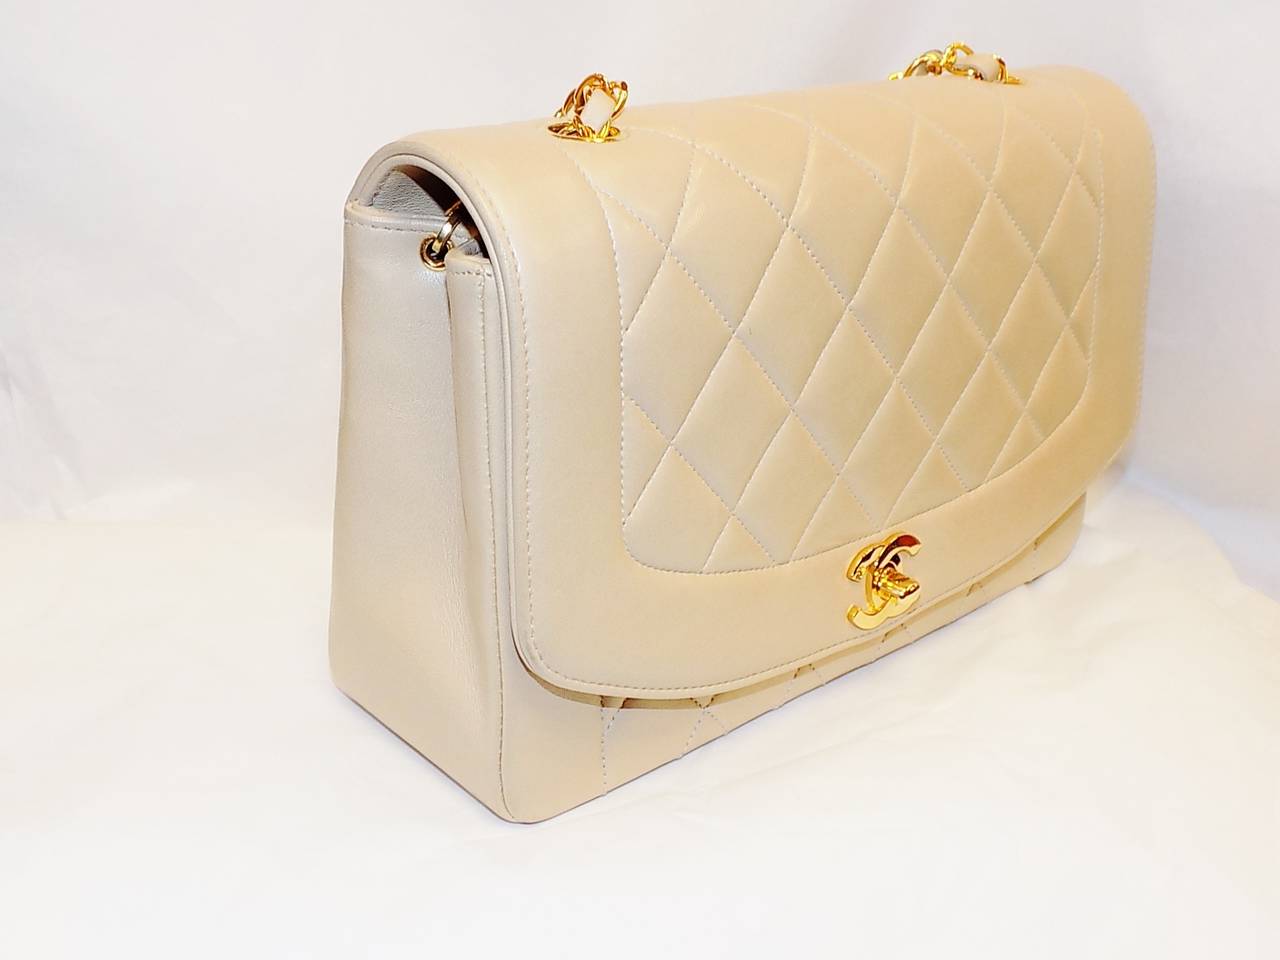 Authentic Chanel Vintage  Quilted  Cream Flap Bag 1